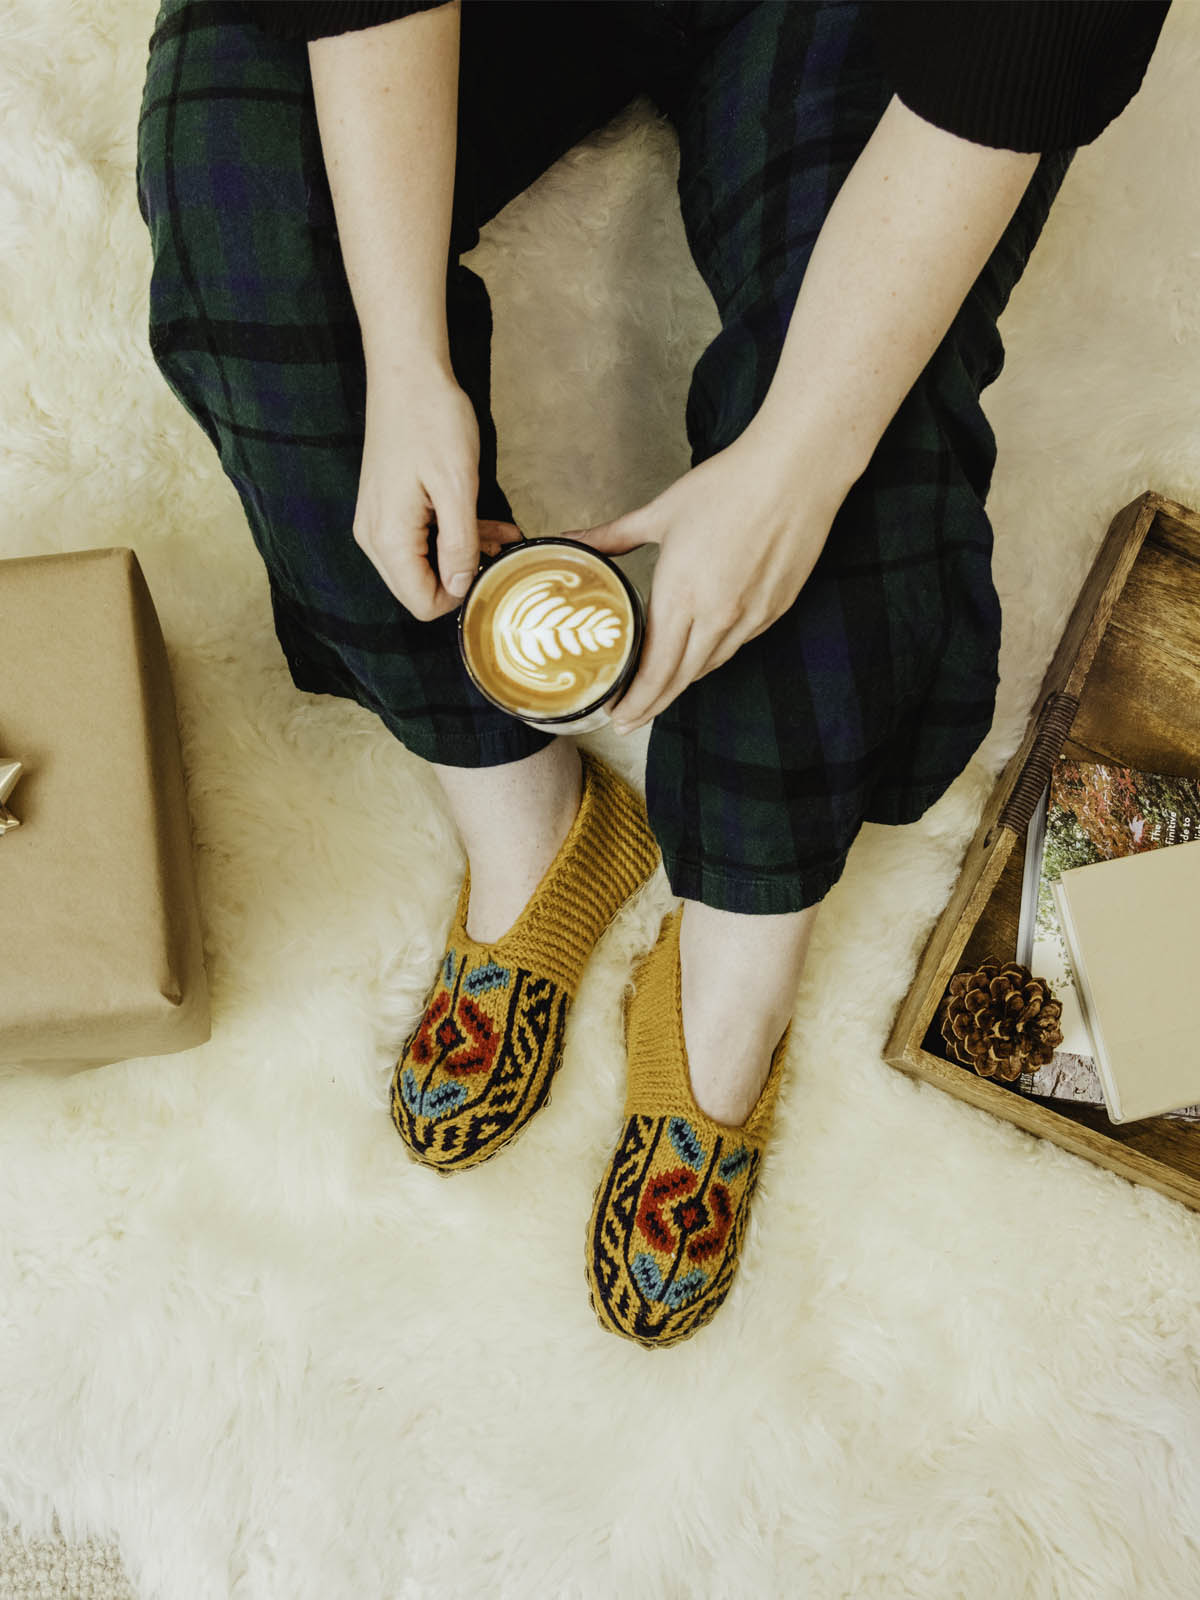 Yellow mustard slocks on a model wearing green plaid pans hold holding a  coffee mug